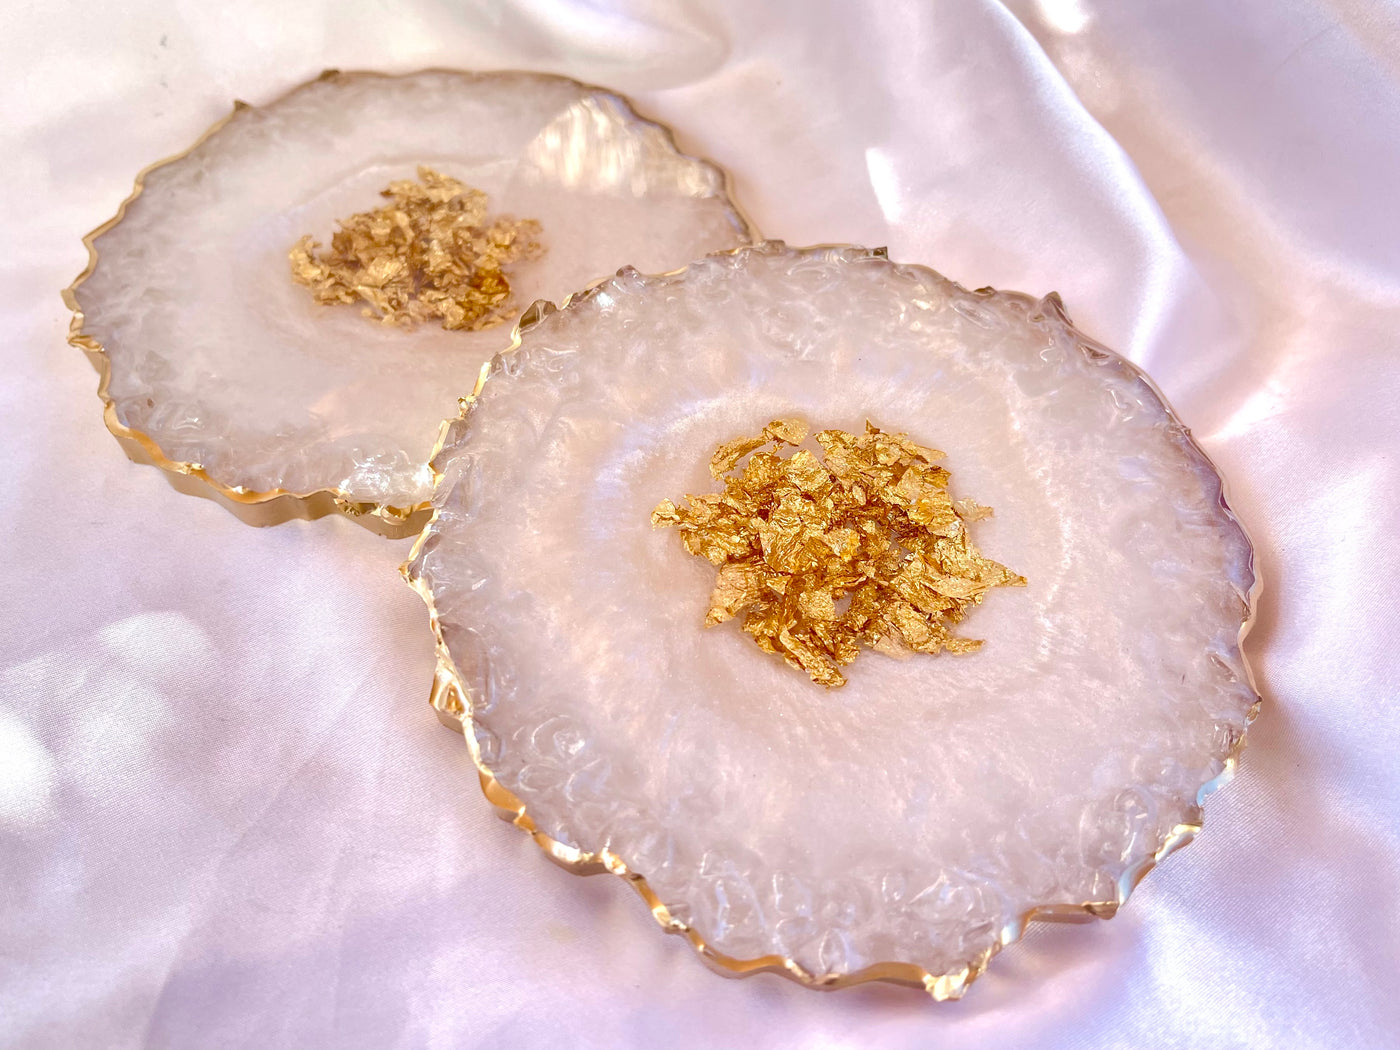 Handmade Pearlescent White and Gold Crushed Glass Elegant Large Resin Geode Coasters with Gold Accented Rim Edges - Jasmin Renee Art - Two Coasters